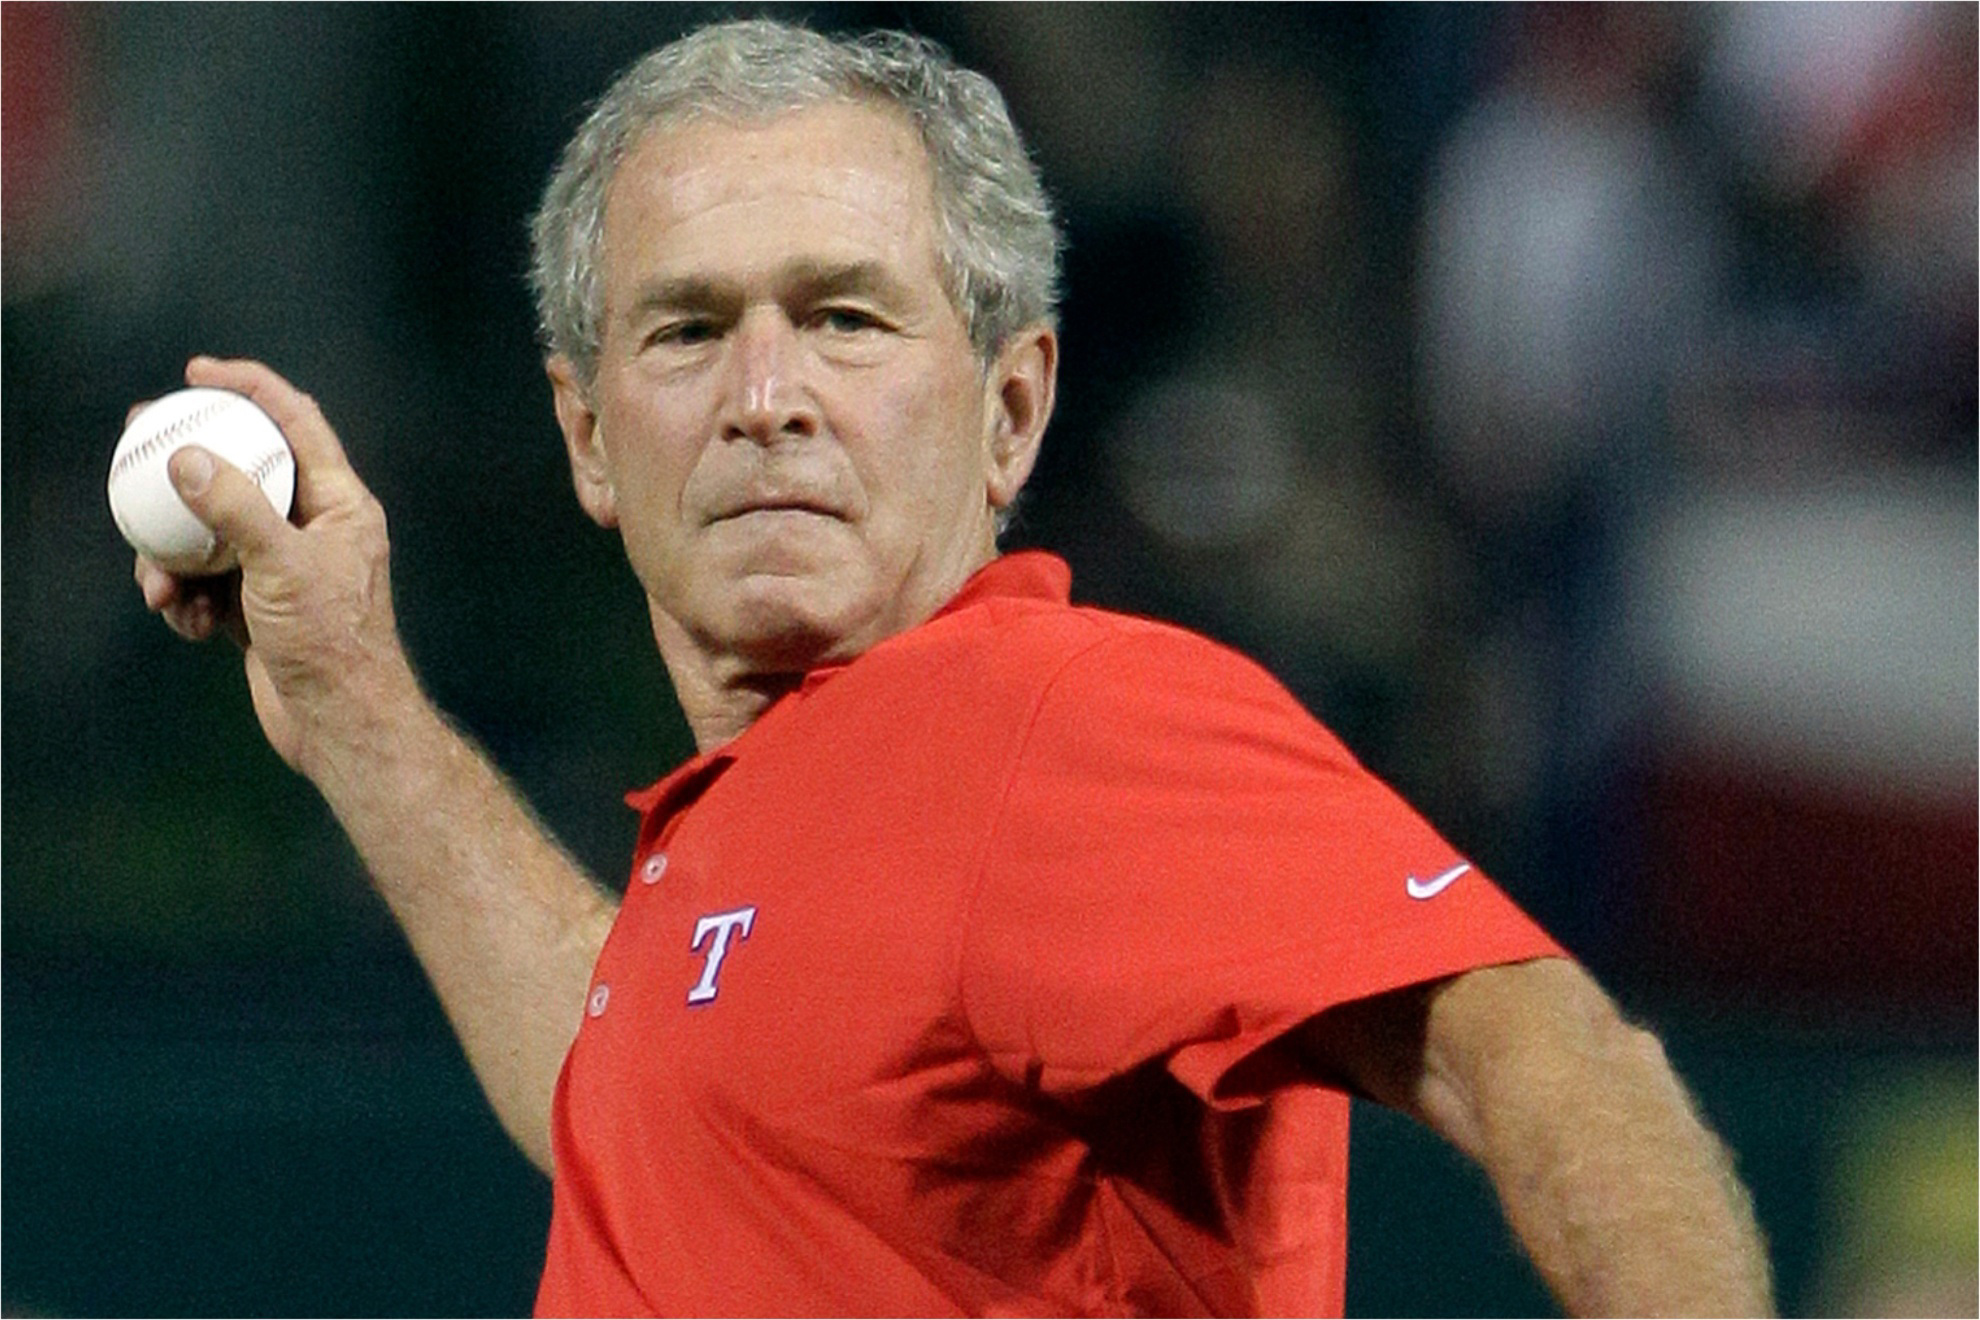 W. Bush to throw ceremonial first pitch at World Series opener